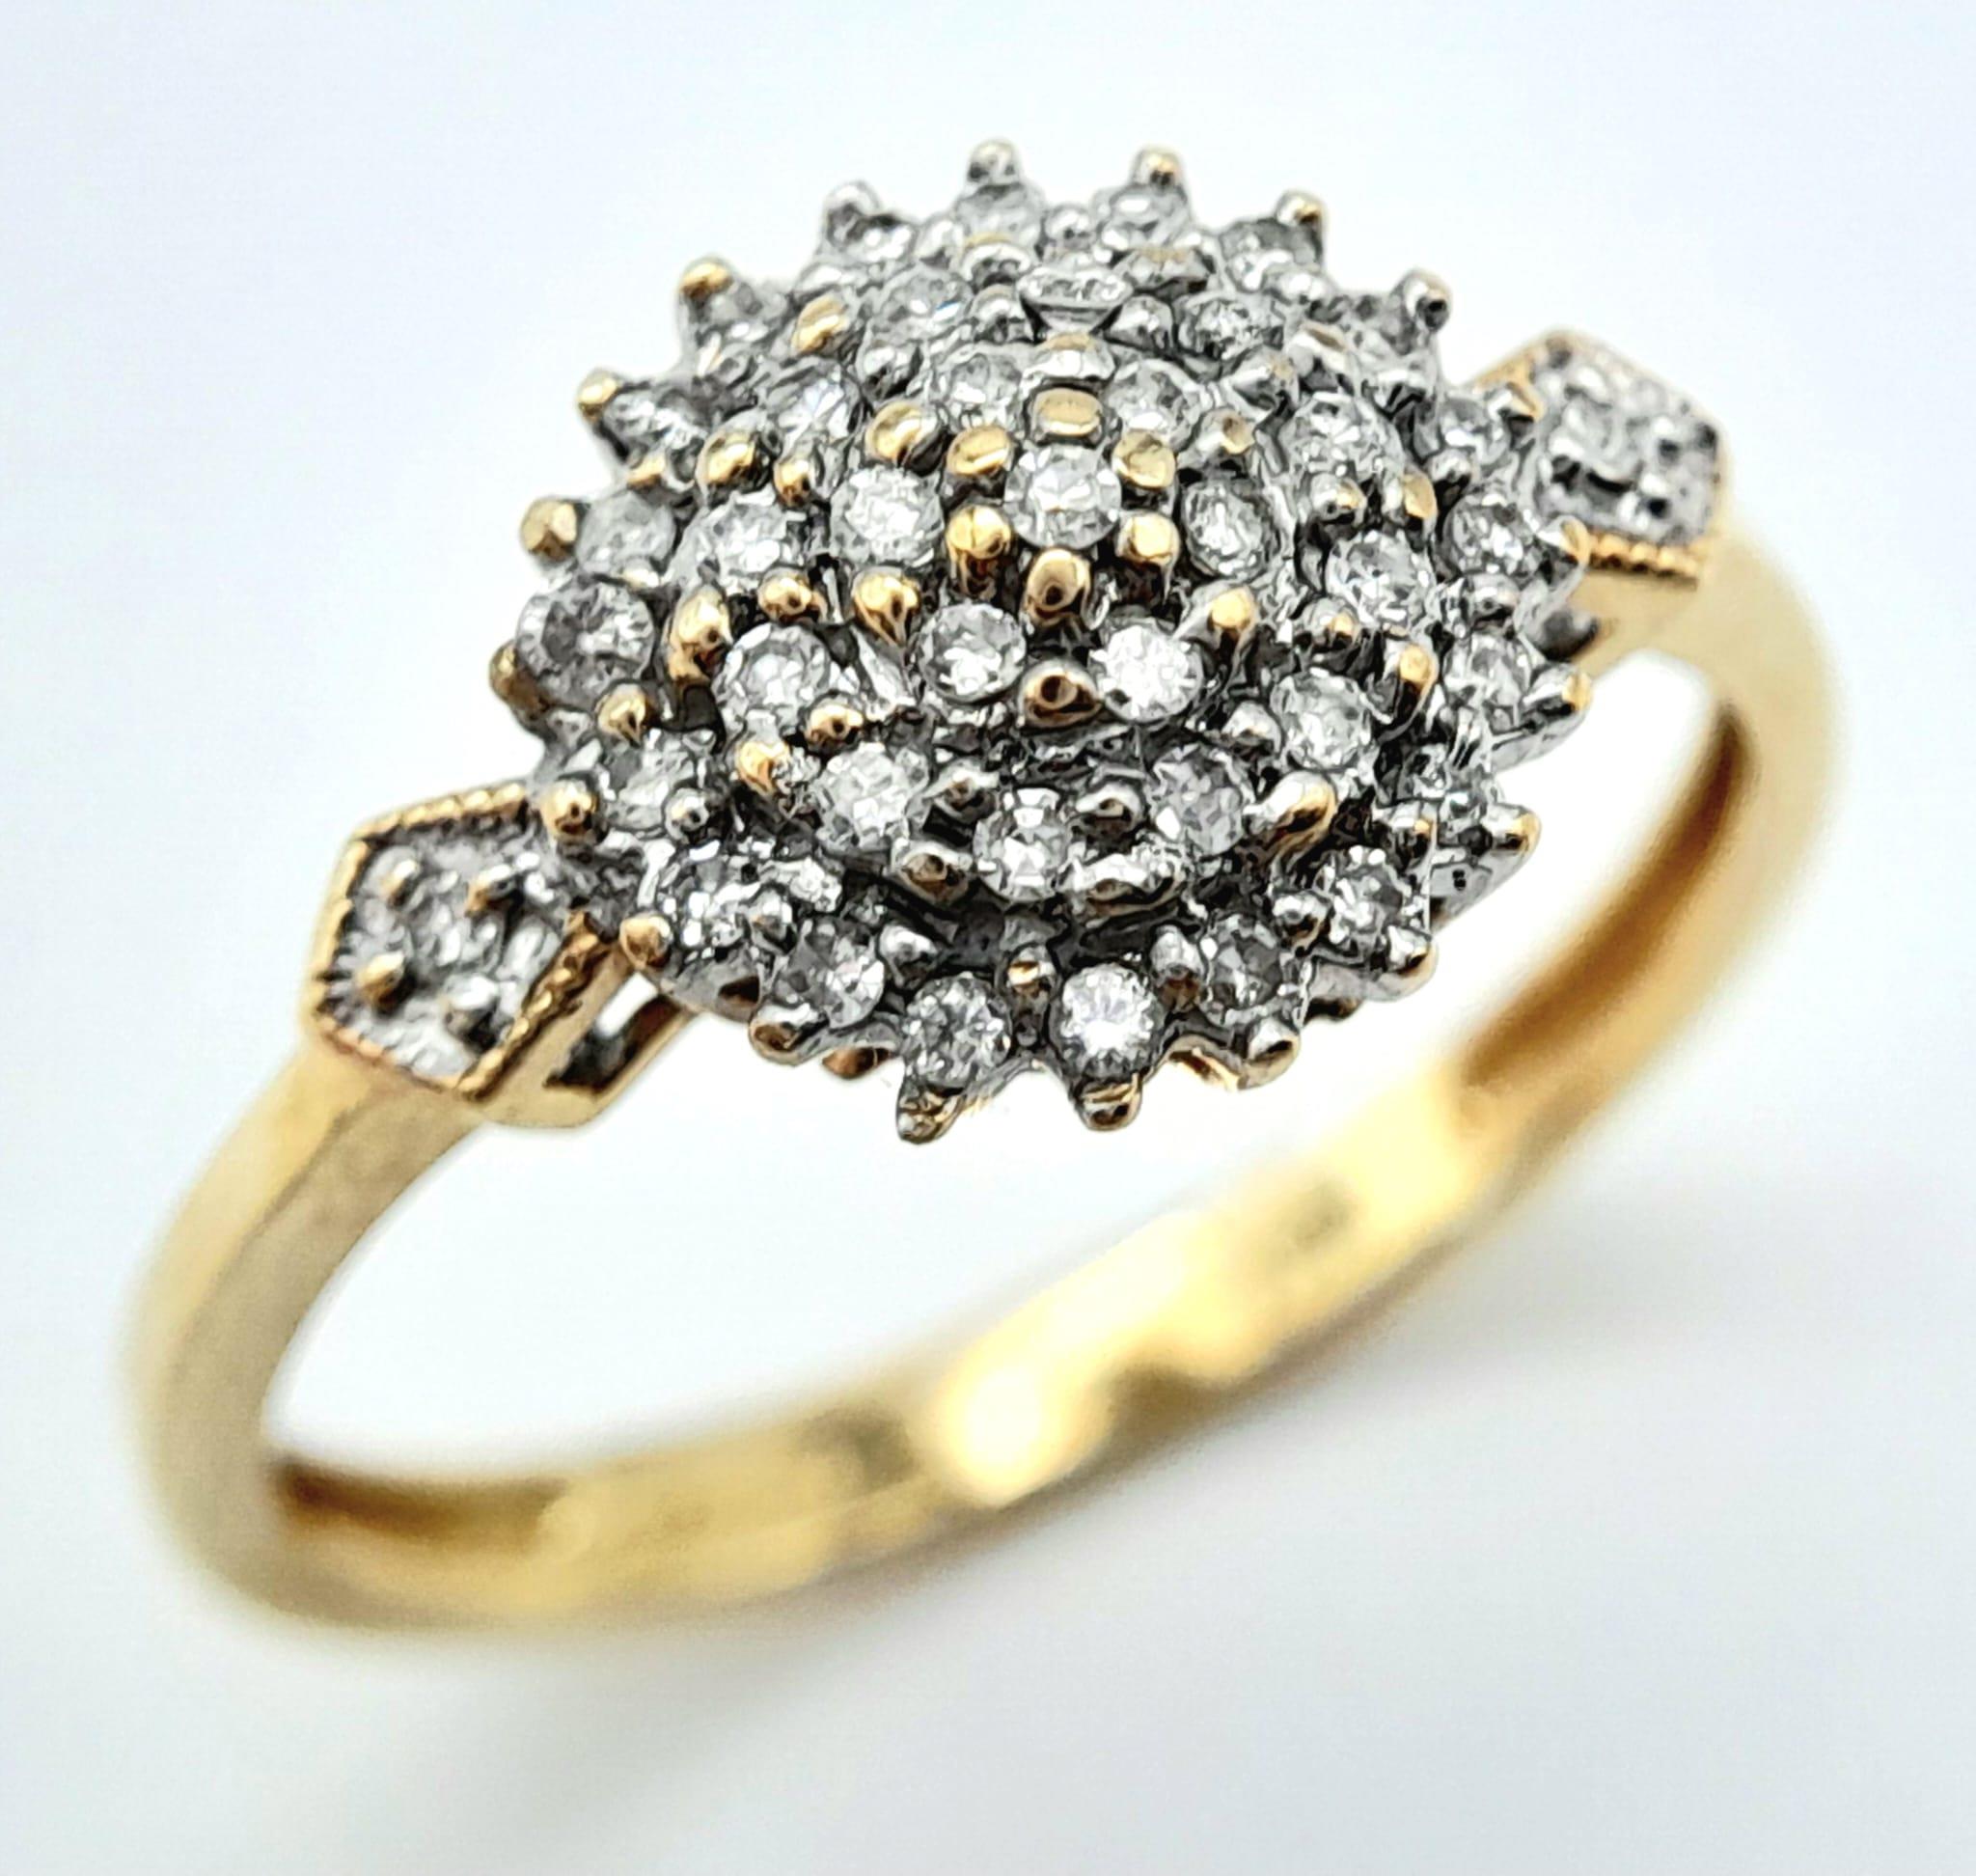 A 9K YELLOW GOLD DIAMOND SET CLUSTER RING. 0.25CTW. 2.2G. SIZE Q. - Image 4 of 6